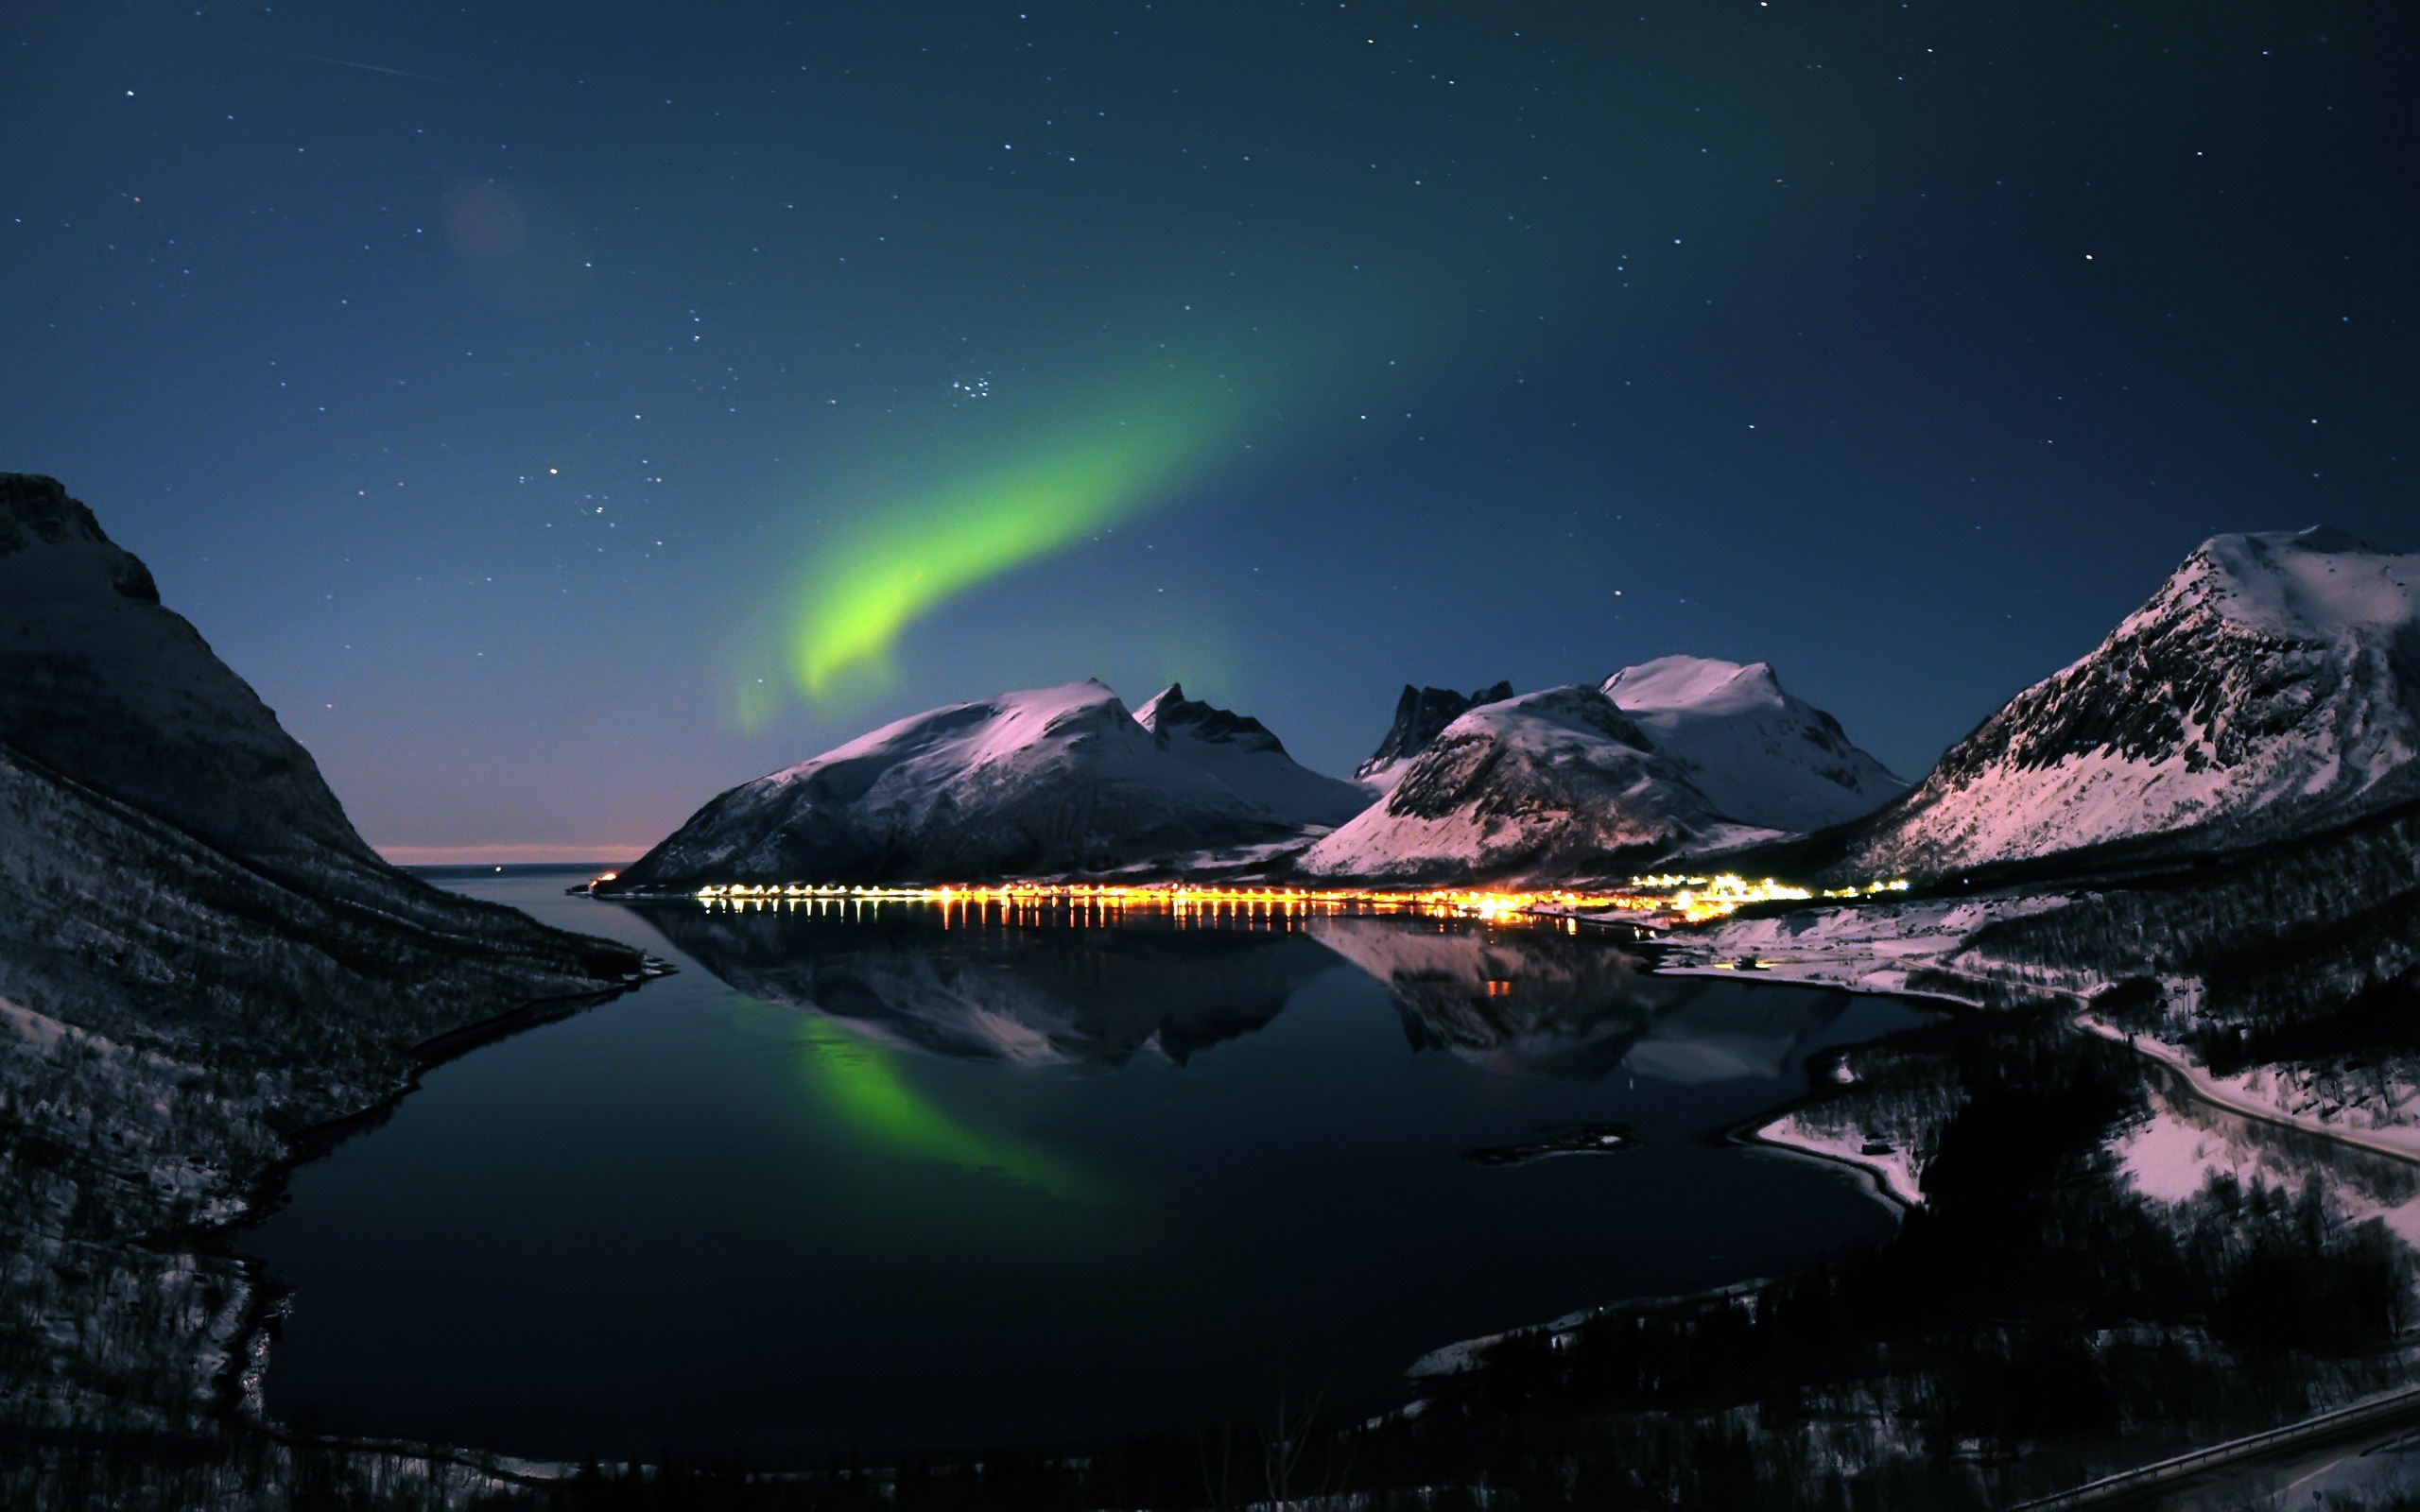 Natural wonders of the Northern Lights HD Wallpaper (2) #2 - 2560x1600